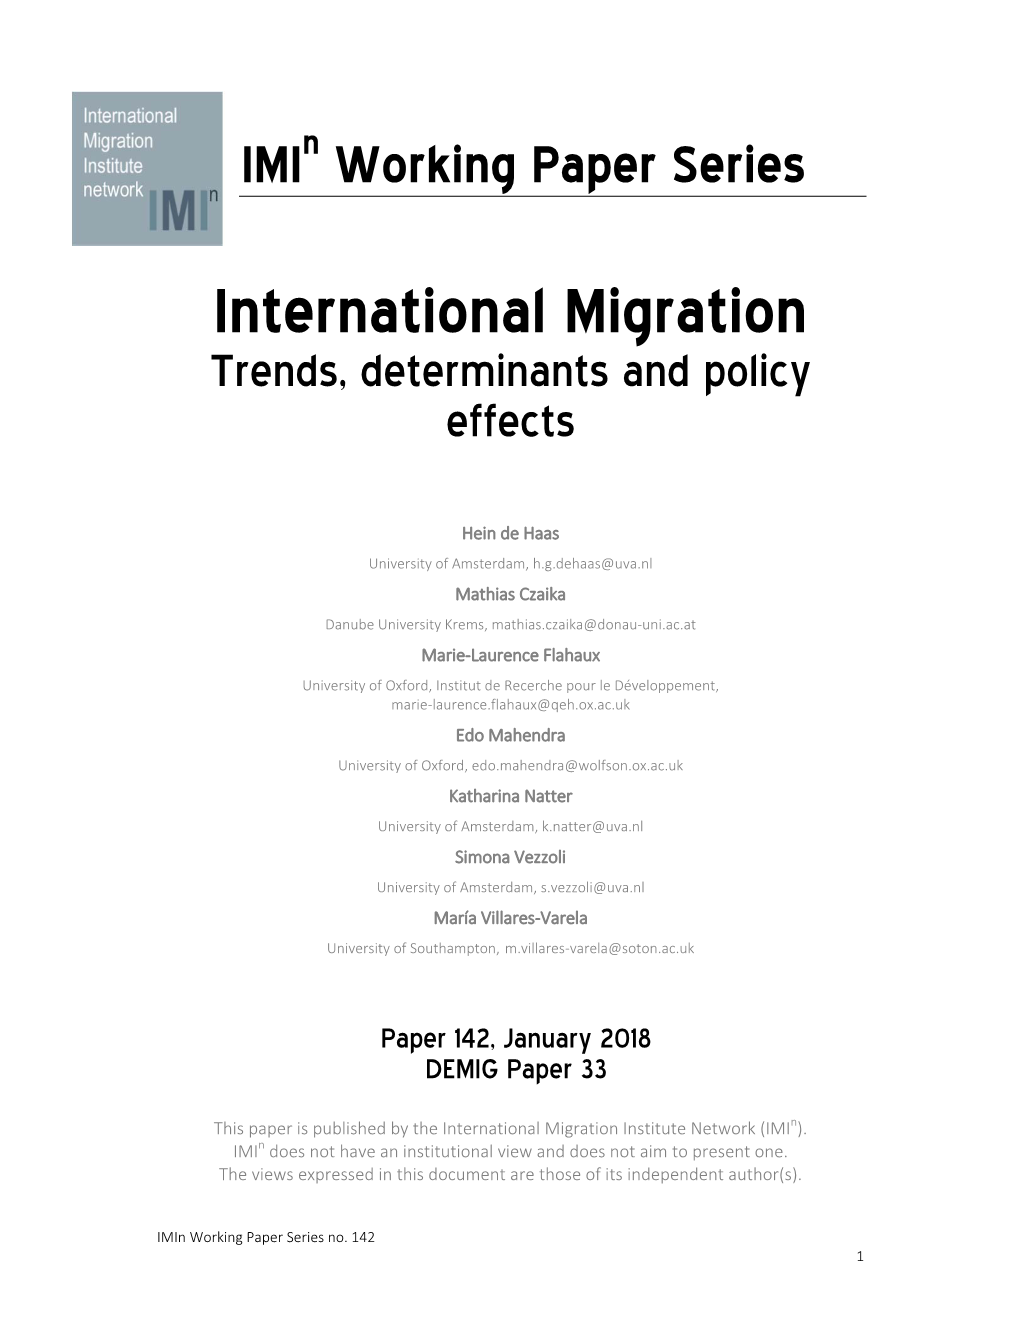 International Migration Trends, Determinants and Policy Effects